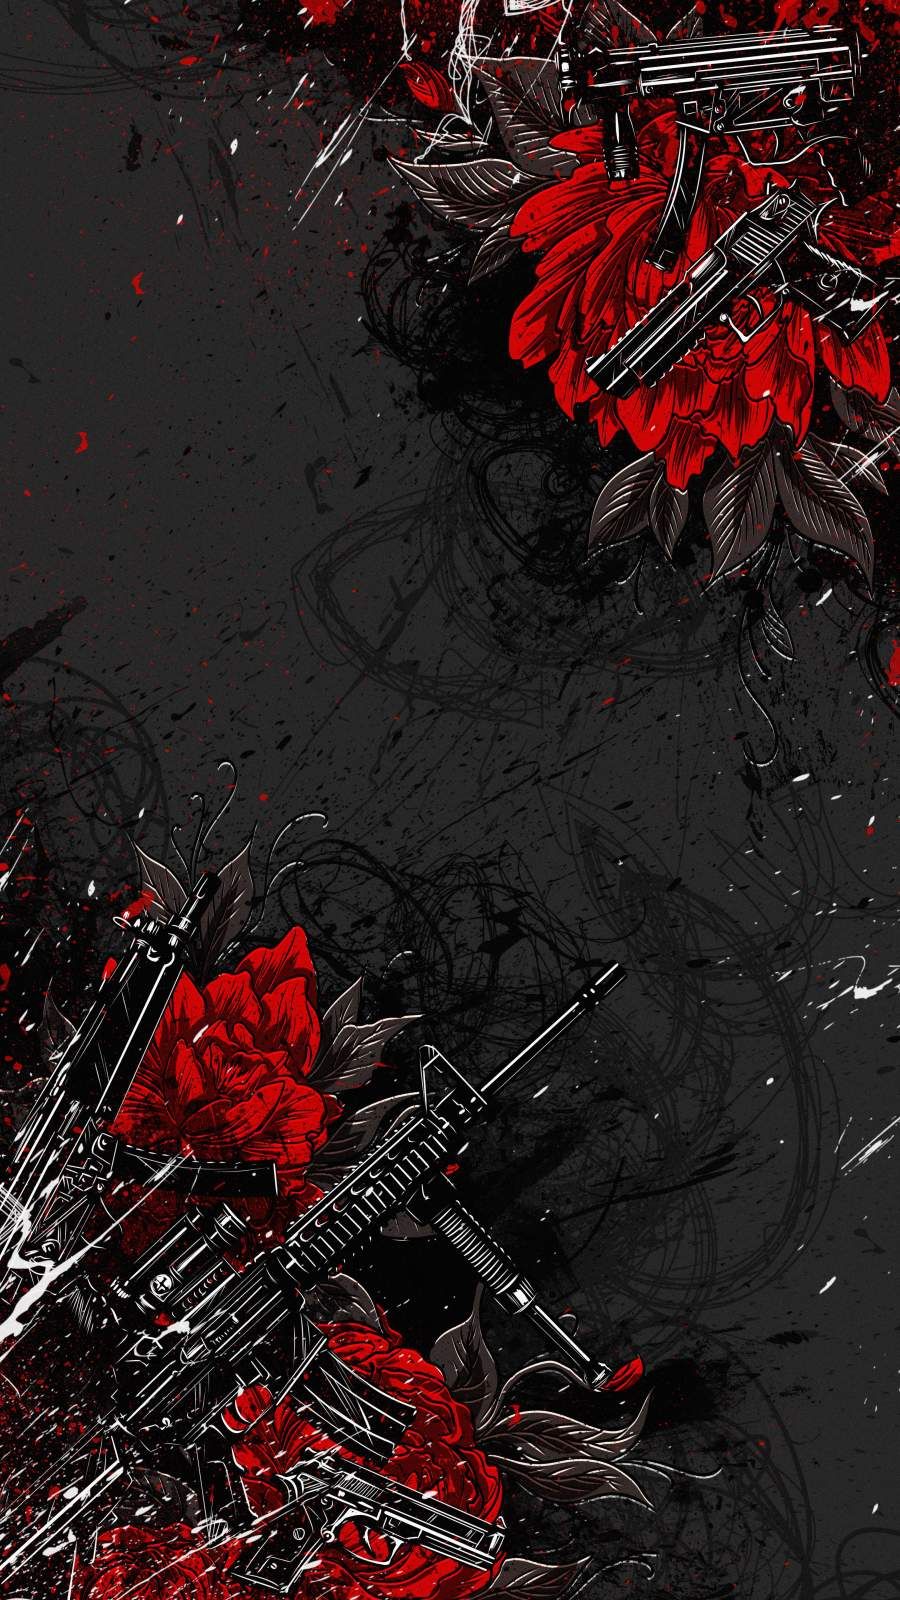 iPhone Wallpaper for iPhone iPhone iPhone X, iPhone XR, iPhone 8 Plus High Quality Wallpap. Wallpaper iphone roses, Dark wallpaper iphone, Goth wallpaper